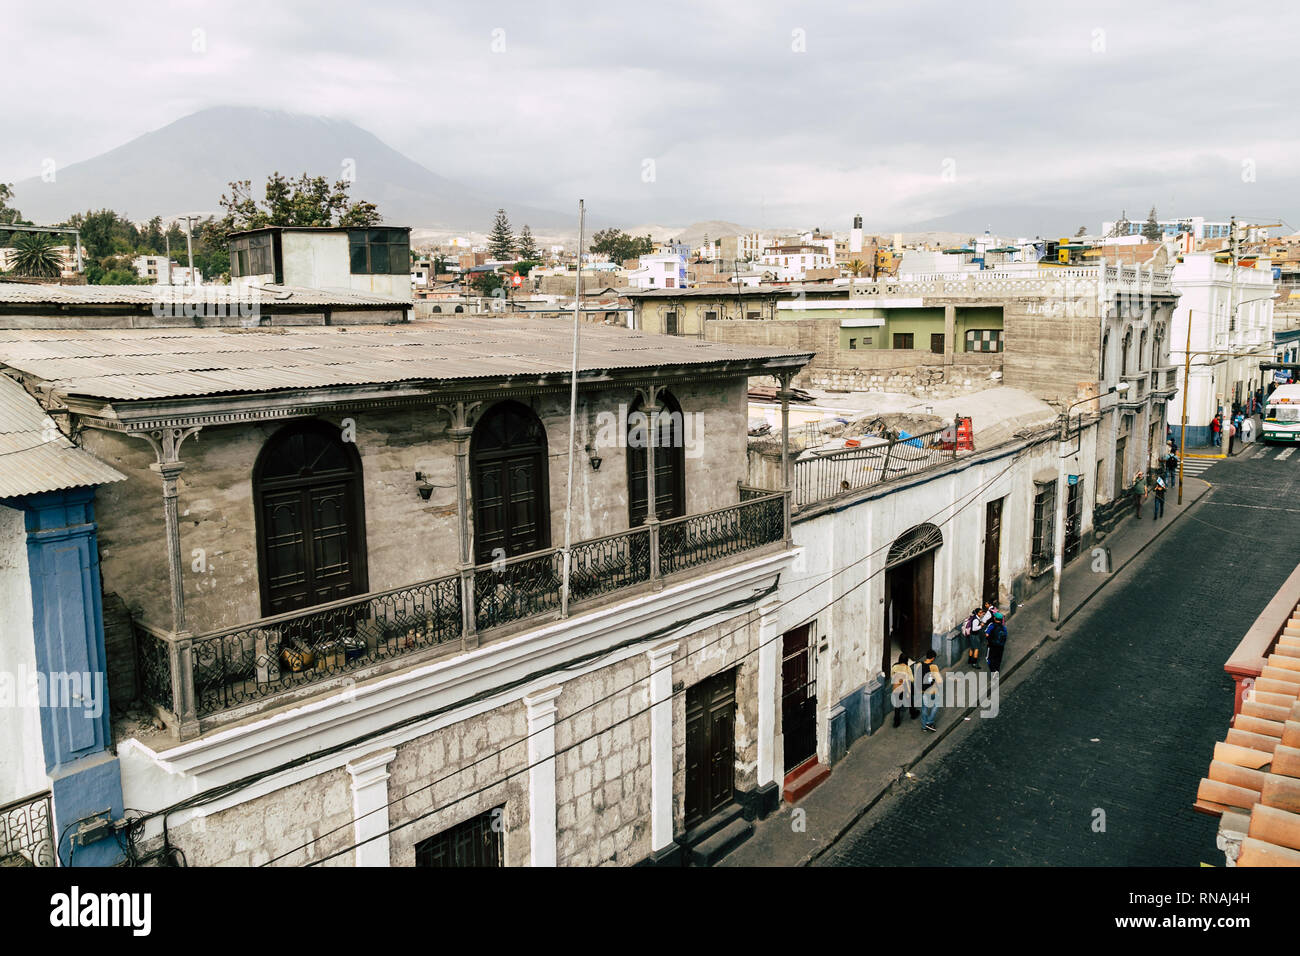 Street view with volcano Misti in the background in Arequipa, Peru. Stock Photo